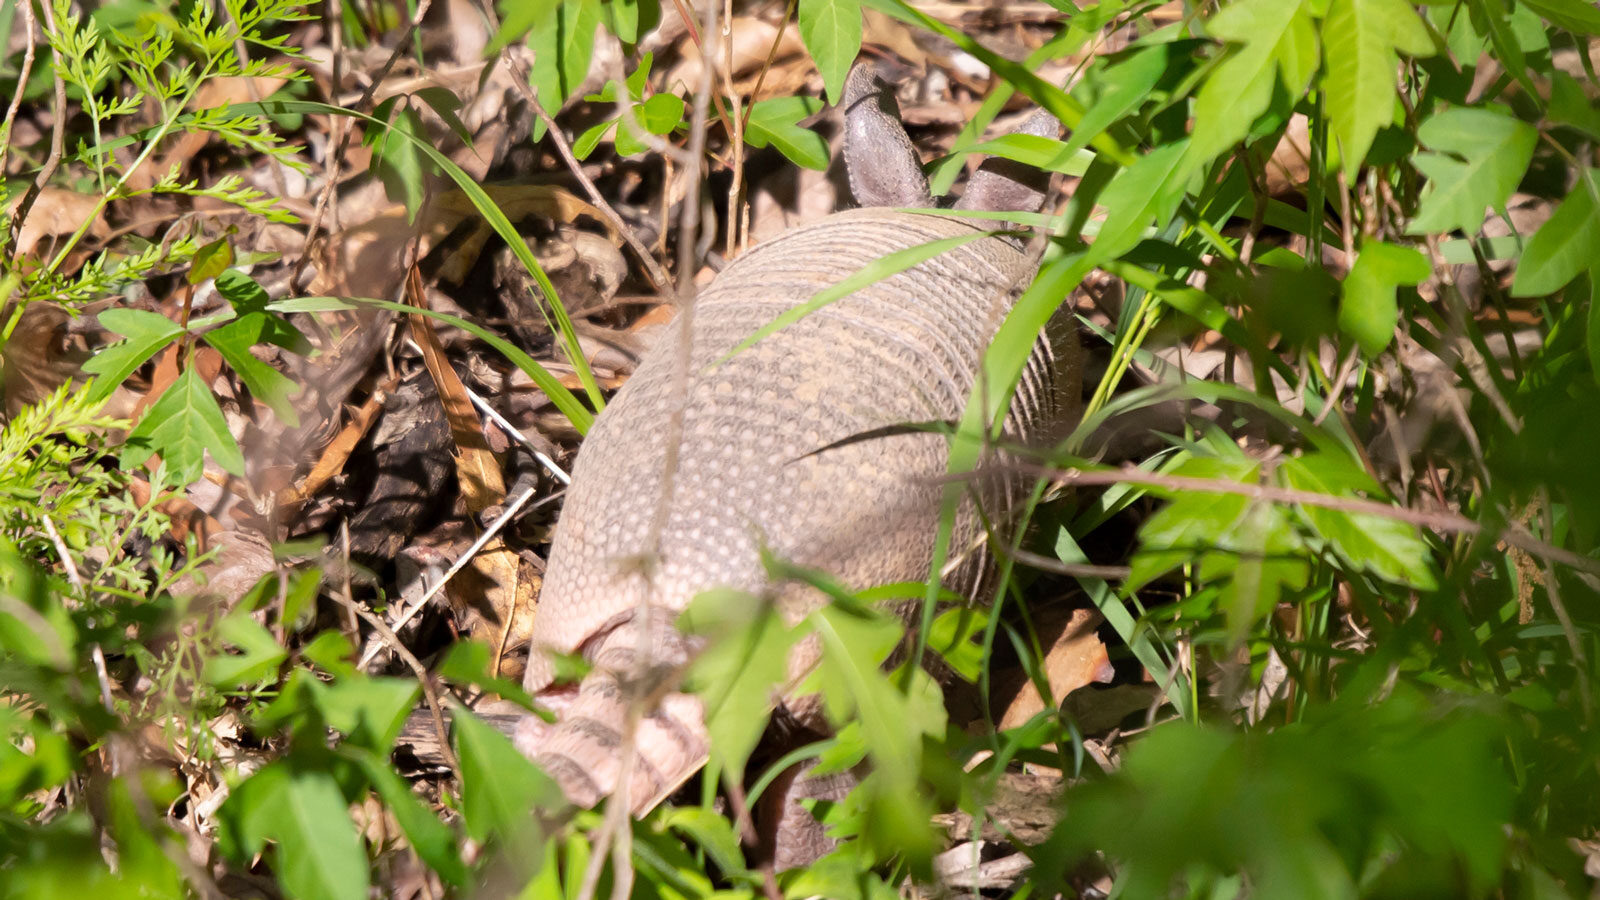 Young armadillo foraging in overgrowth